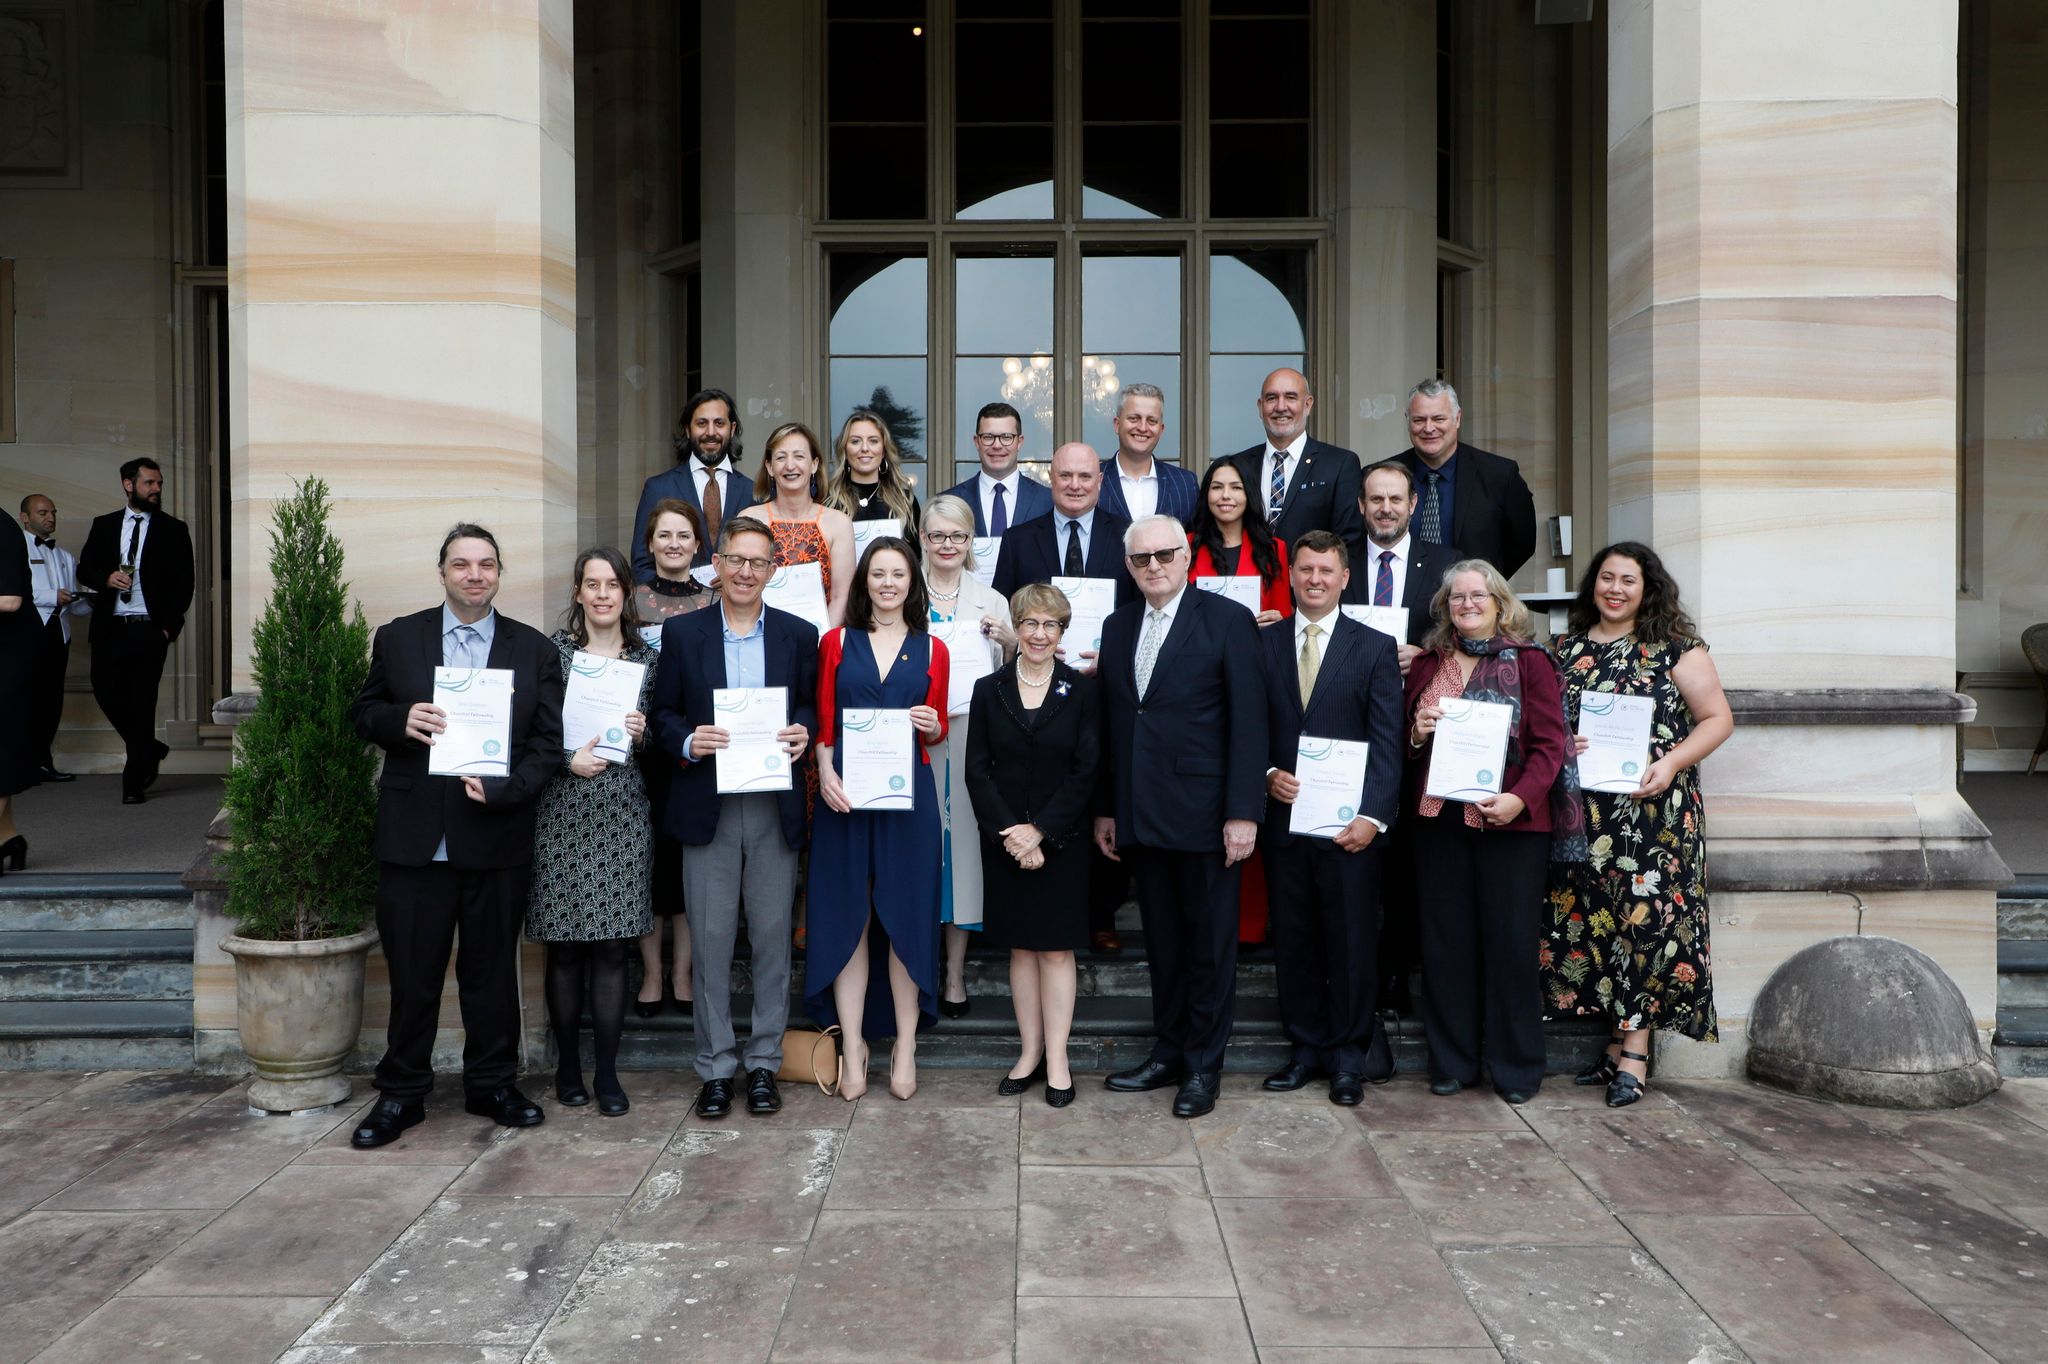 2022 NSW Churchill Fellows & Her Excellency the Honourable Margaret Beazley AC KC, Governor of NSW featured image